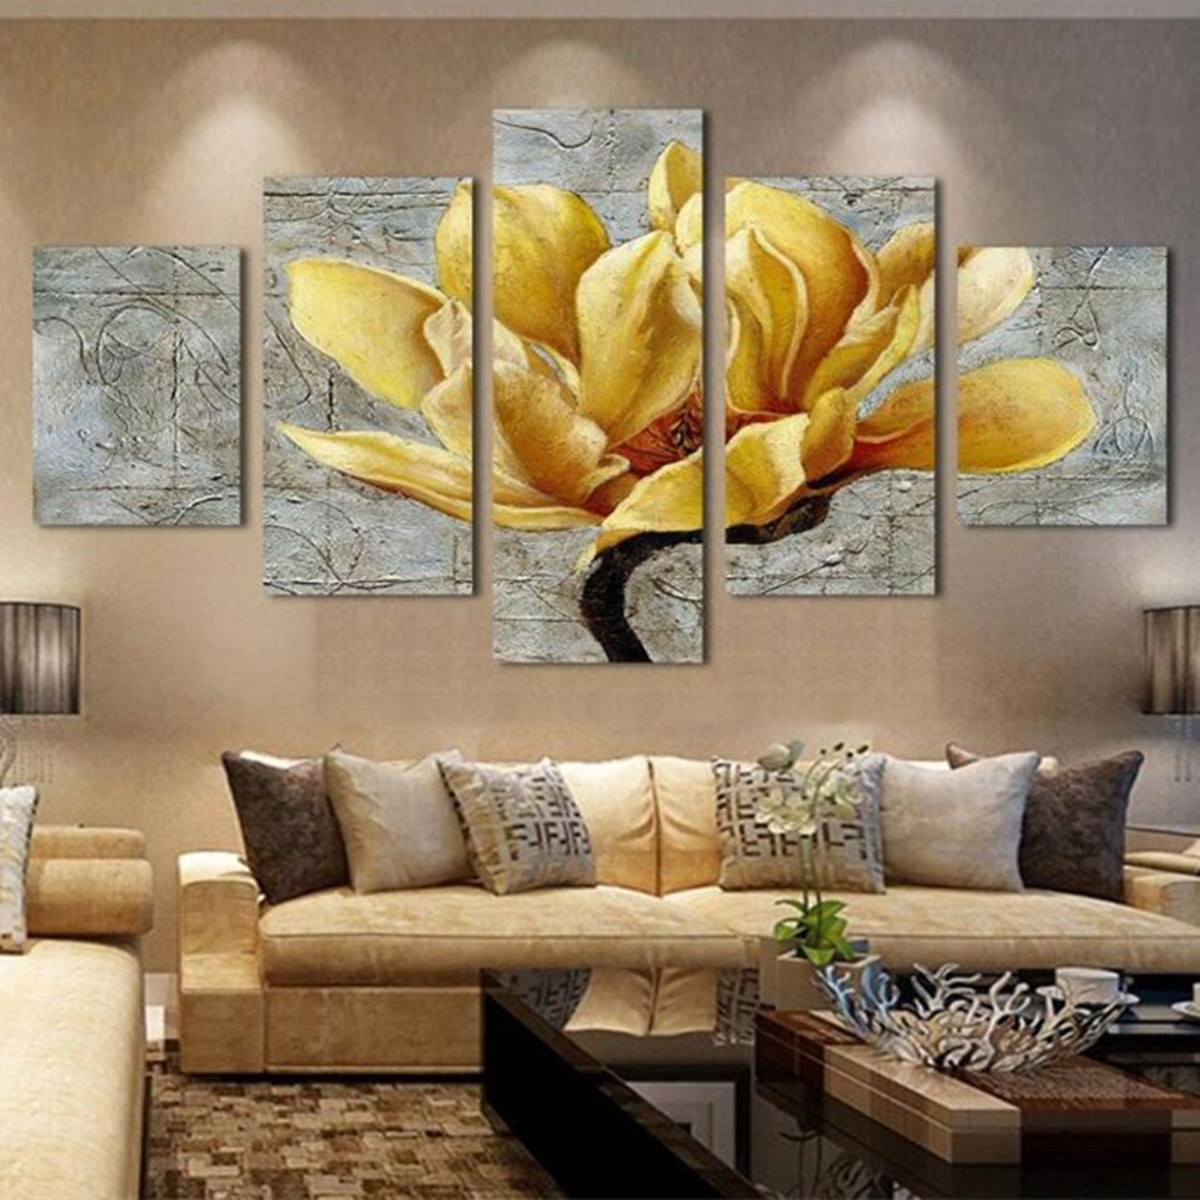 5Pcs-Unframed-Modern-Art-Oil-Paintings-Print-Canvas-Picture-Home-Wall-Room-Decor-1639651-3